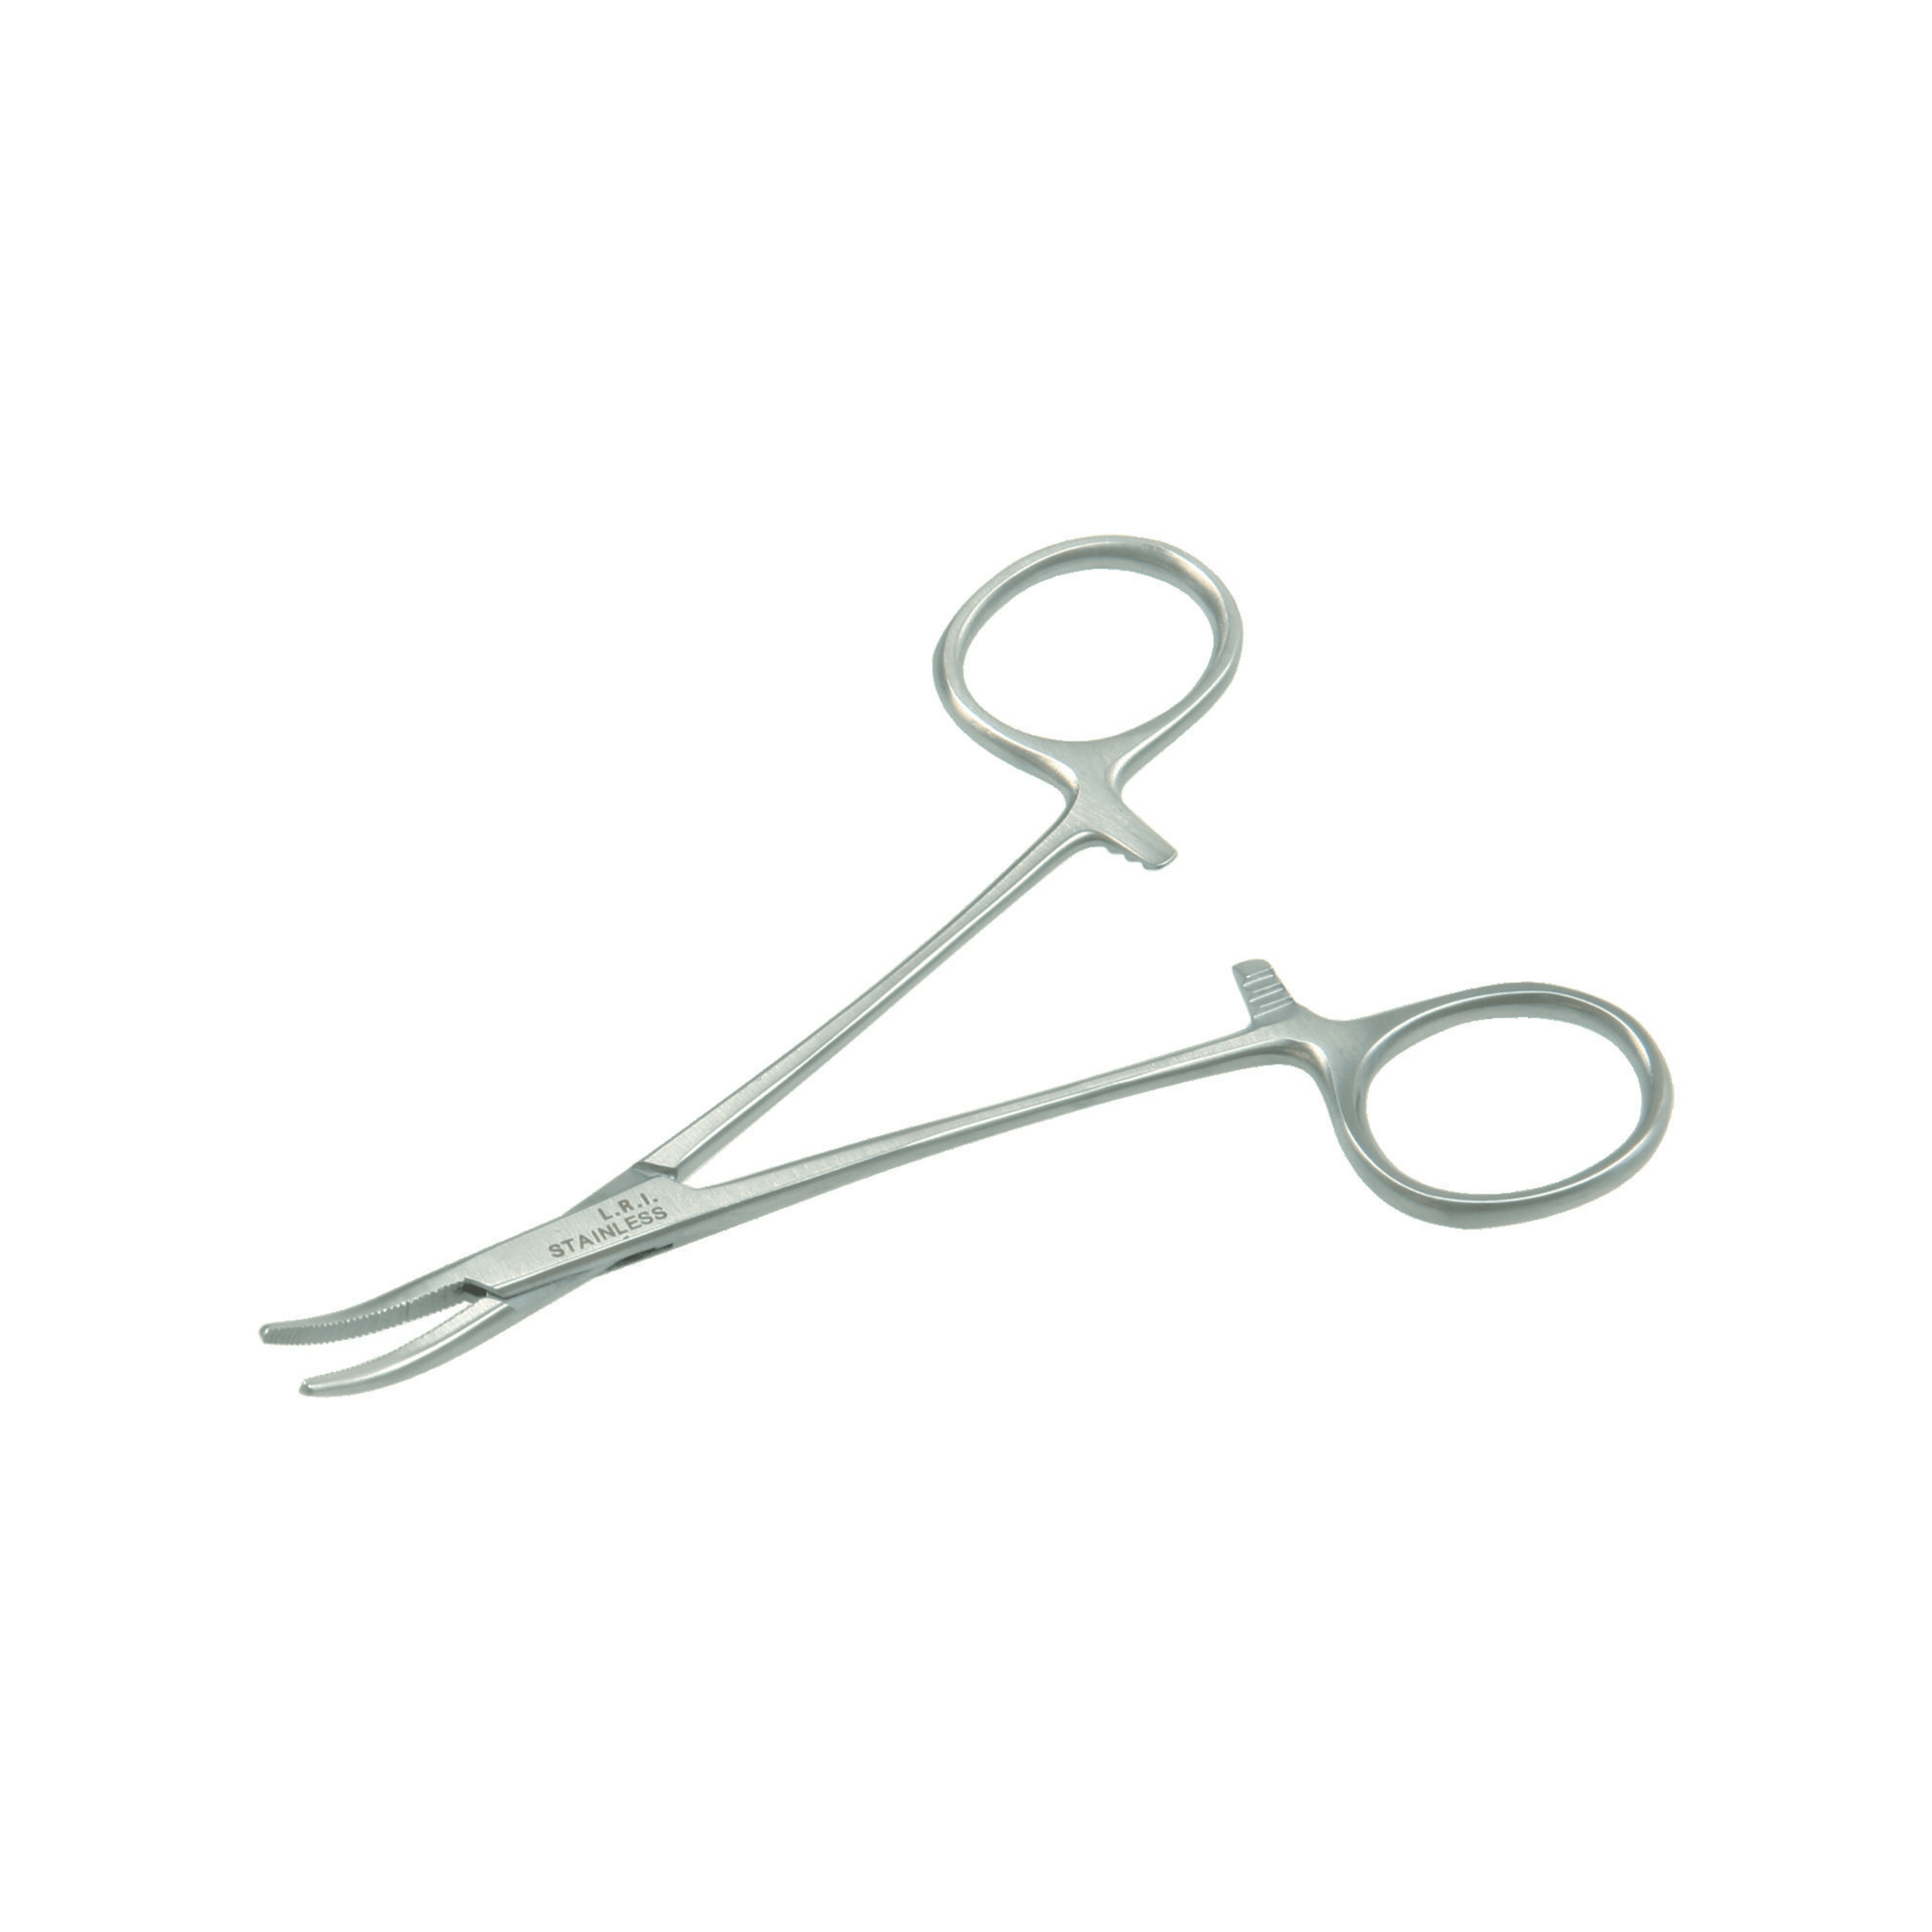 Mosquito Artery Forceps- Curved, 12.5 cm